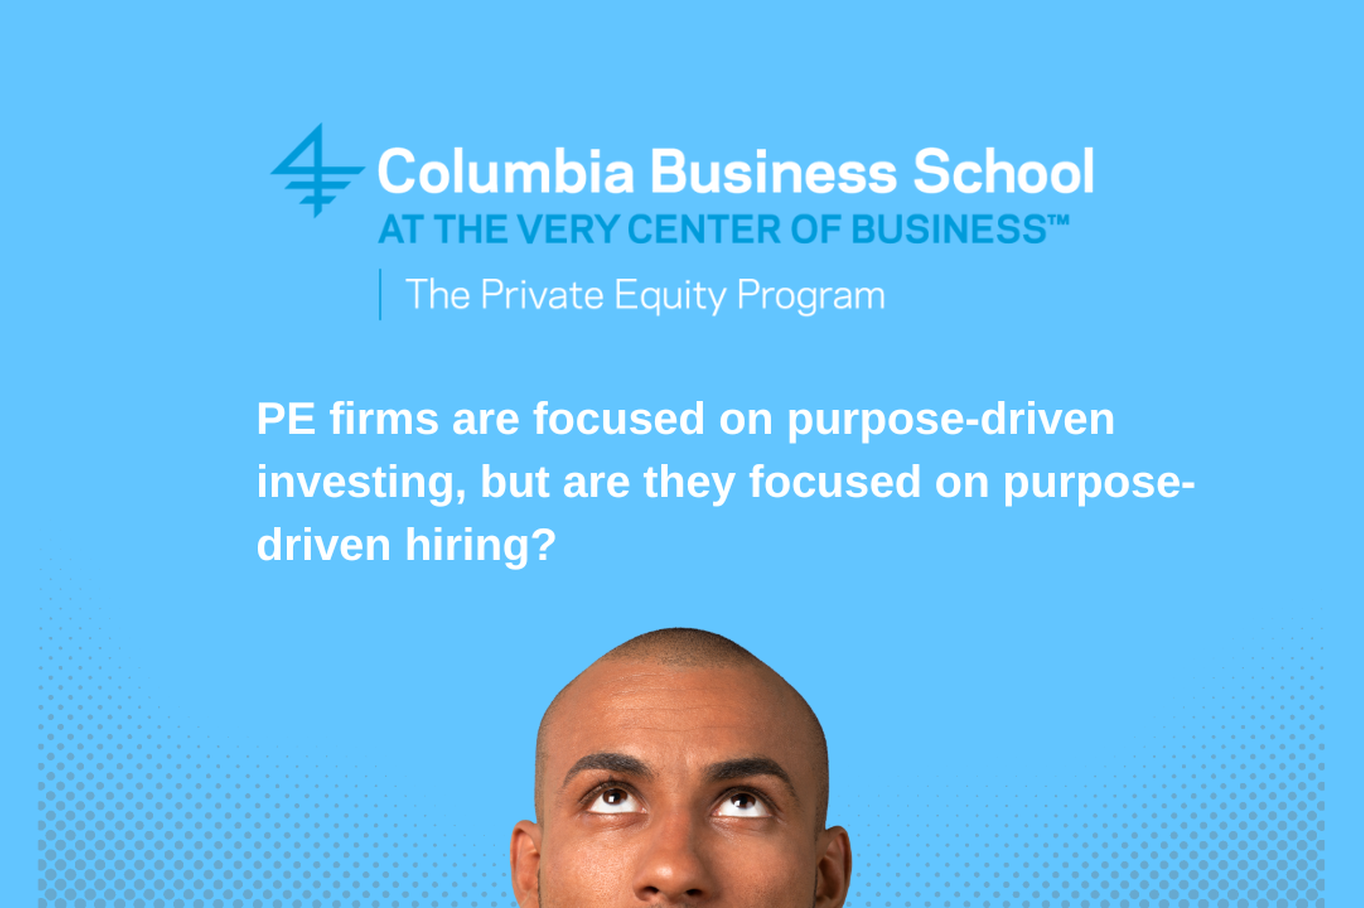 The top half of a bald person looks up at the CBS and PEP logo, as well as the following question: "PE firms are focused on purpose-driven investing, but are they focused on purpose-driven hiring?"